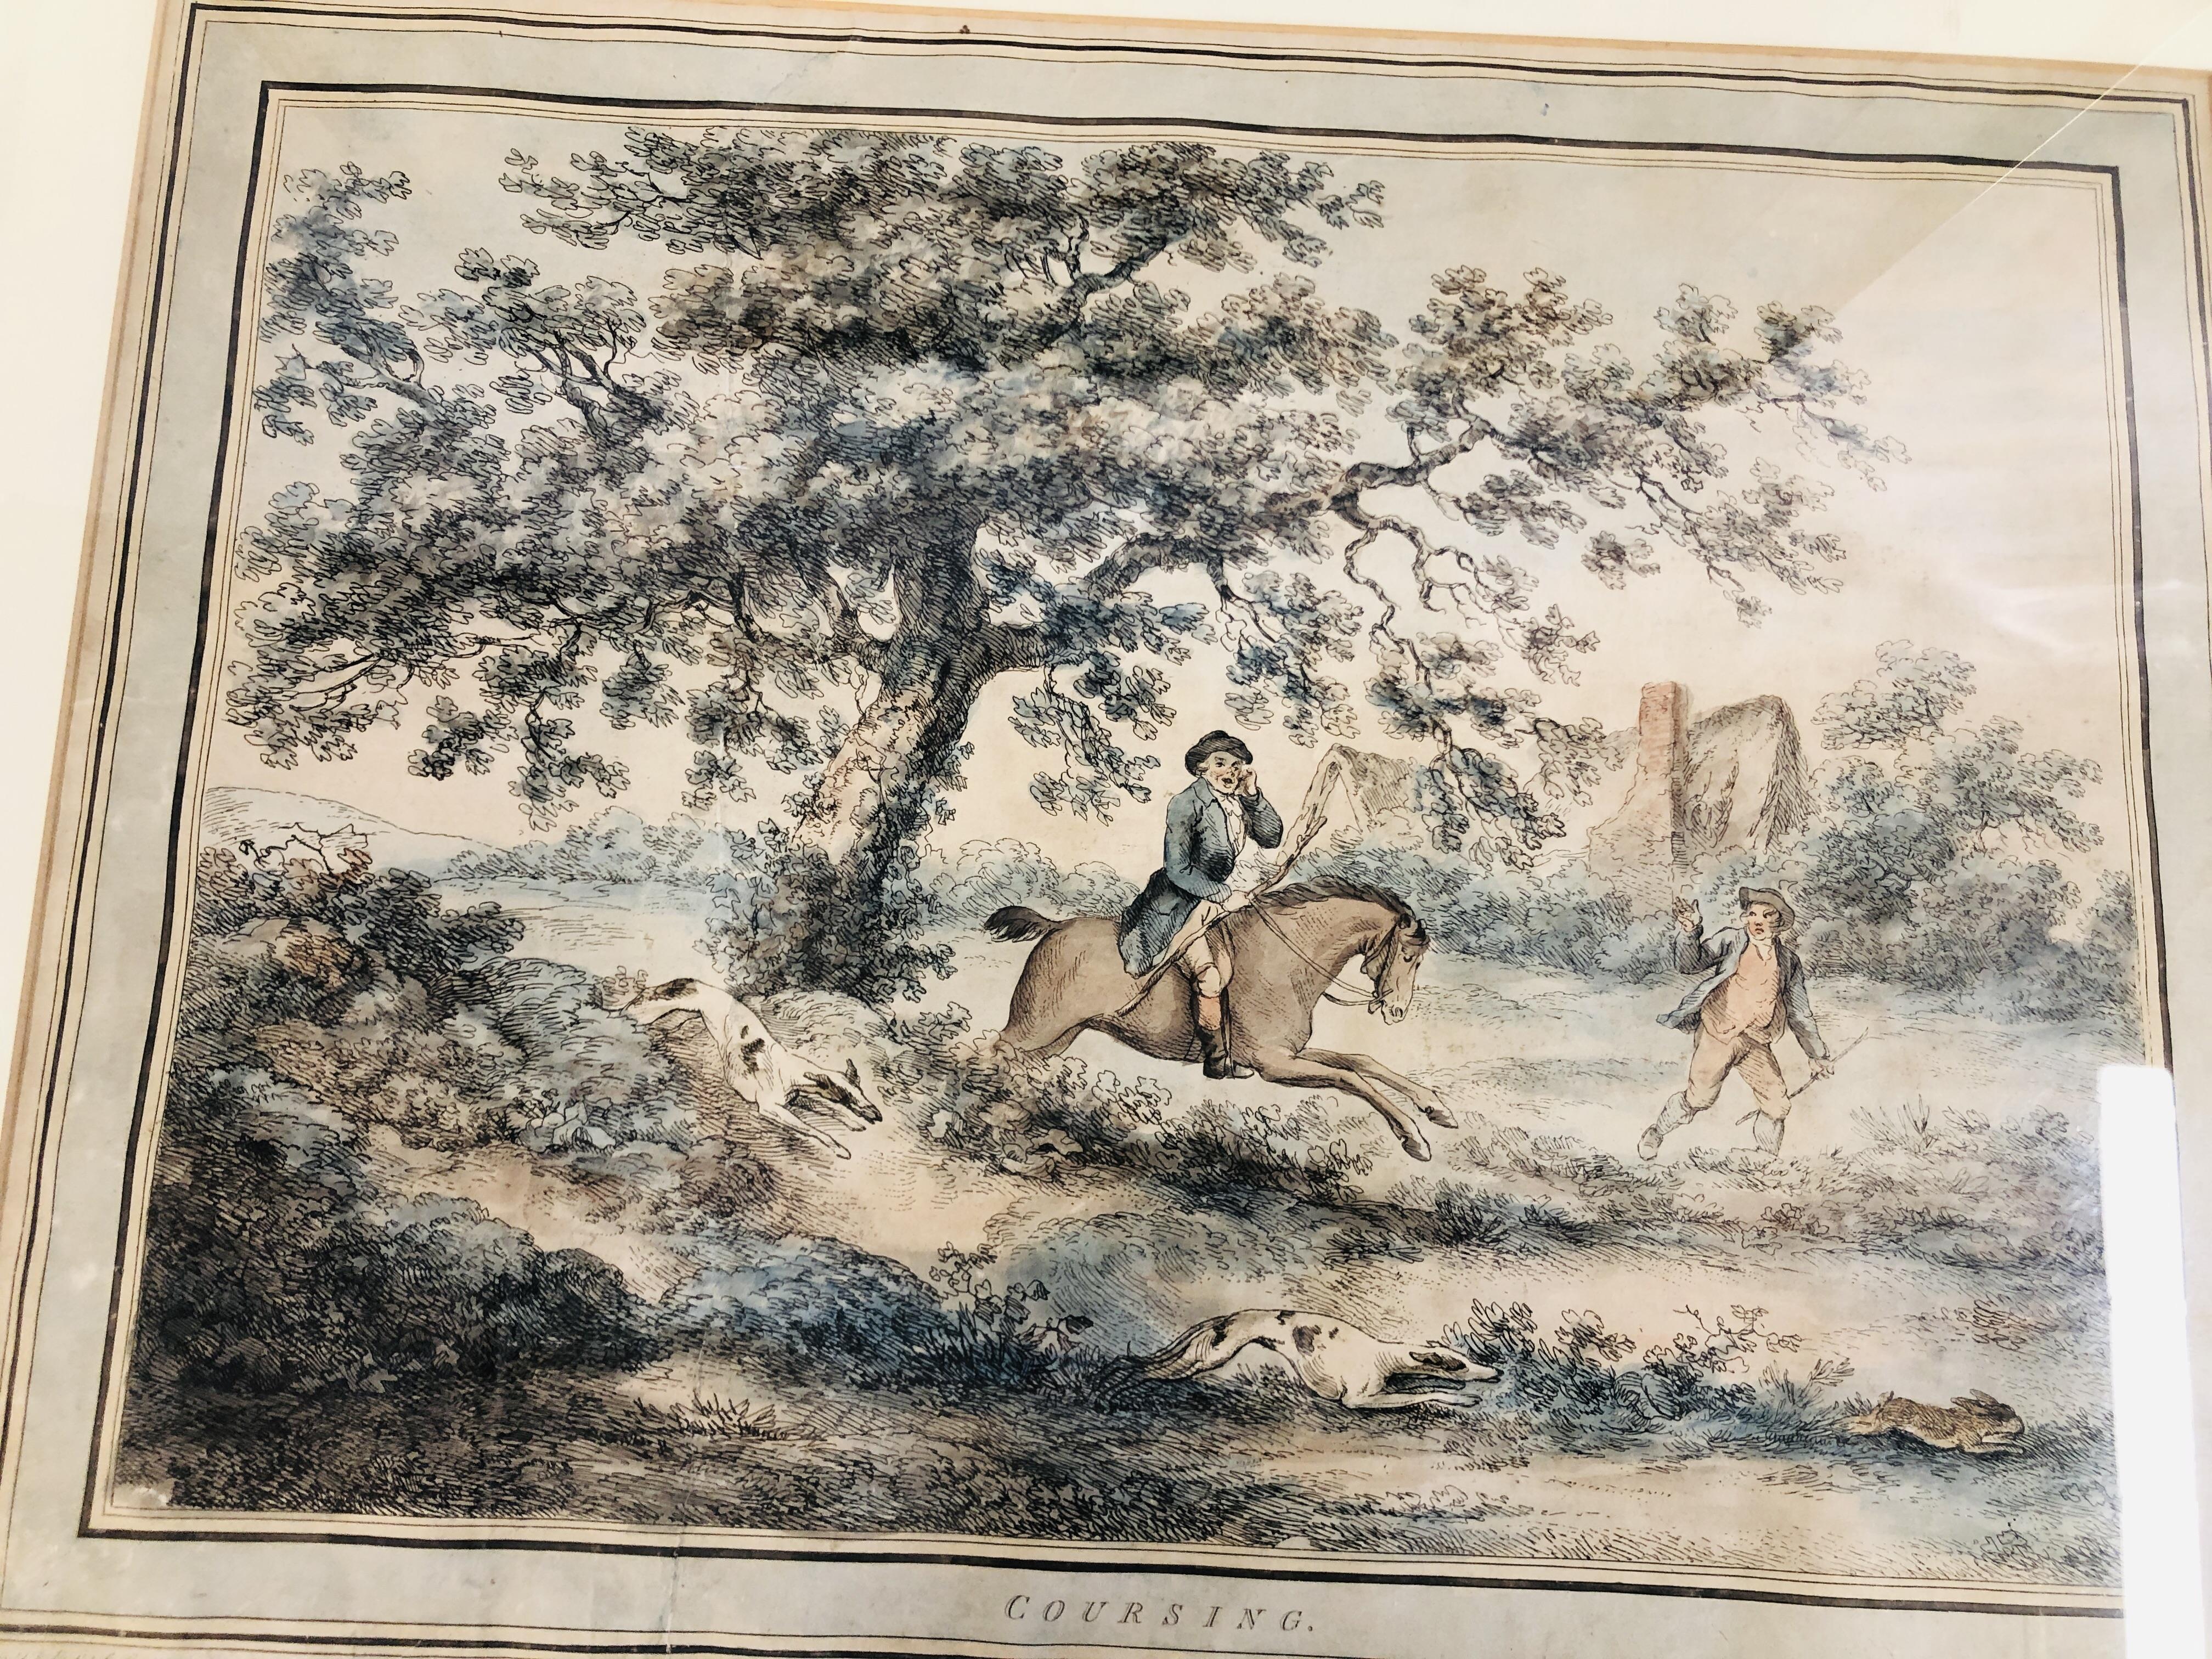 TWO HAND COLOURED ENGRAVINGS HUNTING SCENES "COURSING" FRAMED AND MOUNTED EACH 43CM X 55CM. - Image 6 of 11